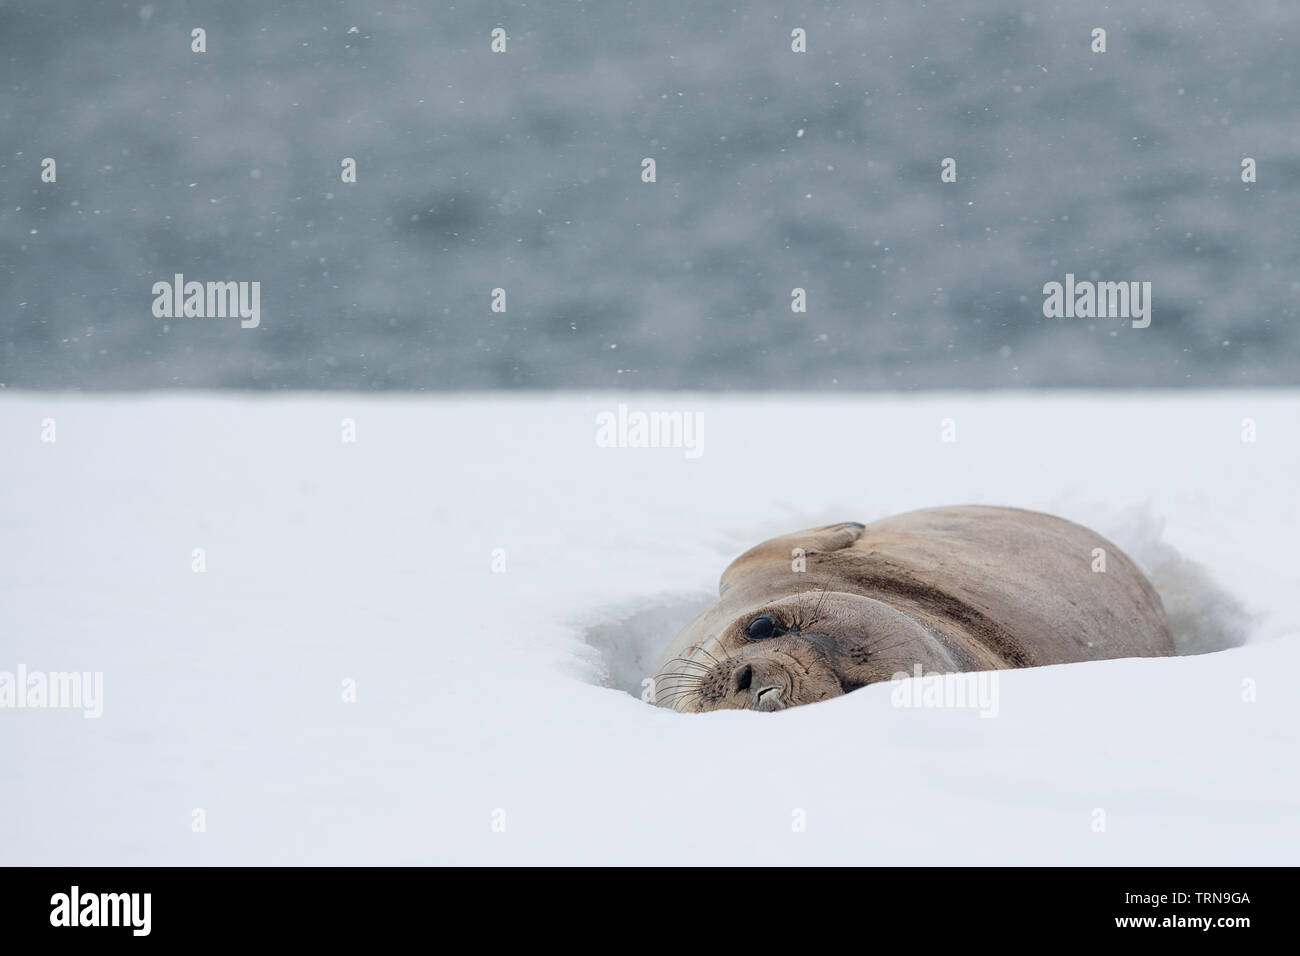 A young elephant seal peering out from its resting place in the snow in Antarctica Stock Photo